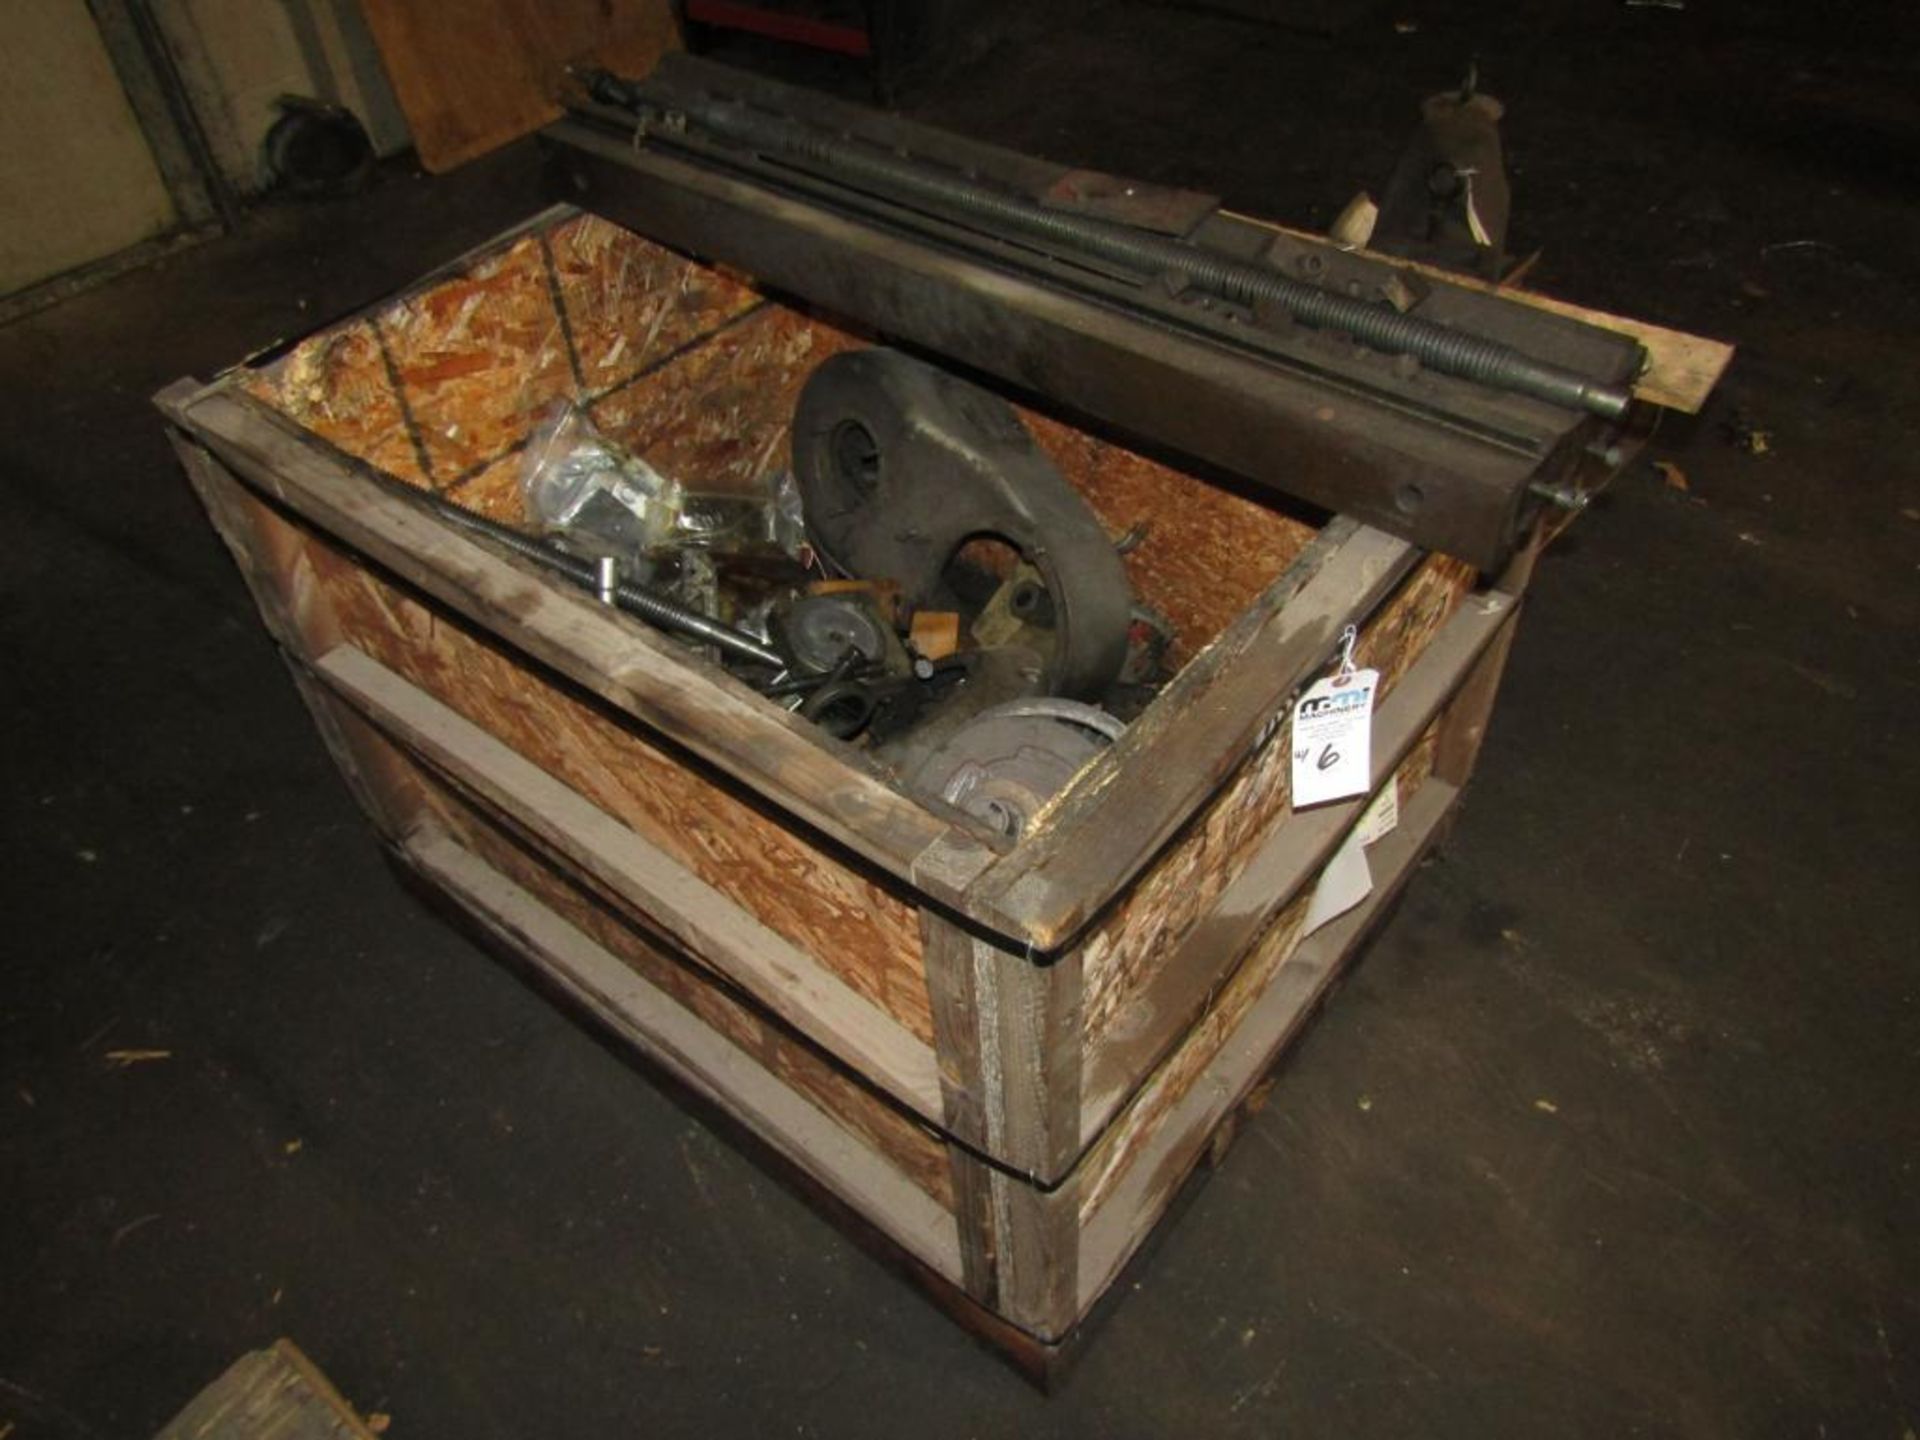 Bridgeport 2-HP Vertical Milling Machine; S/N 164115; 9" x 42" T-Slotted Table (Disassembled) - Image 3 of 4